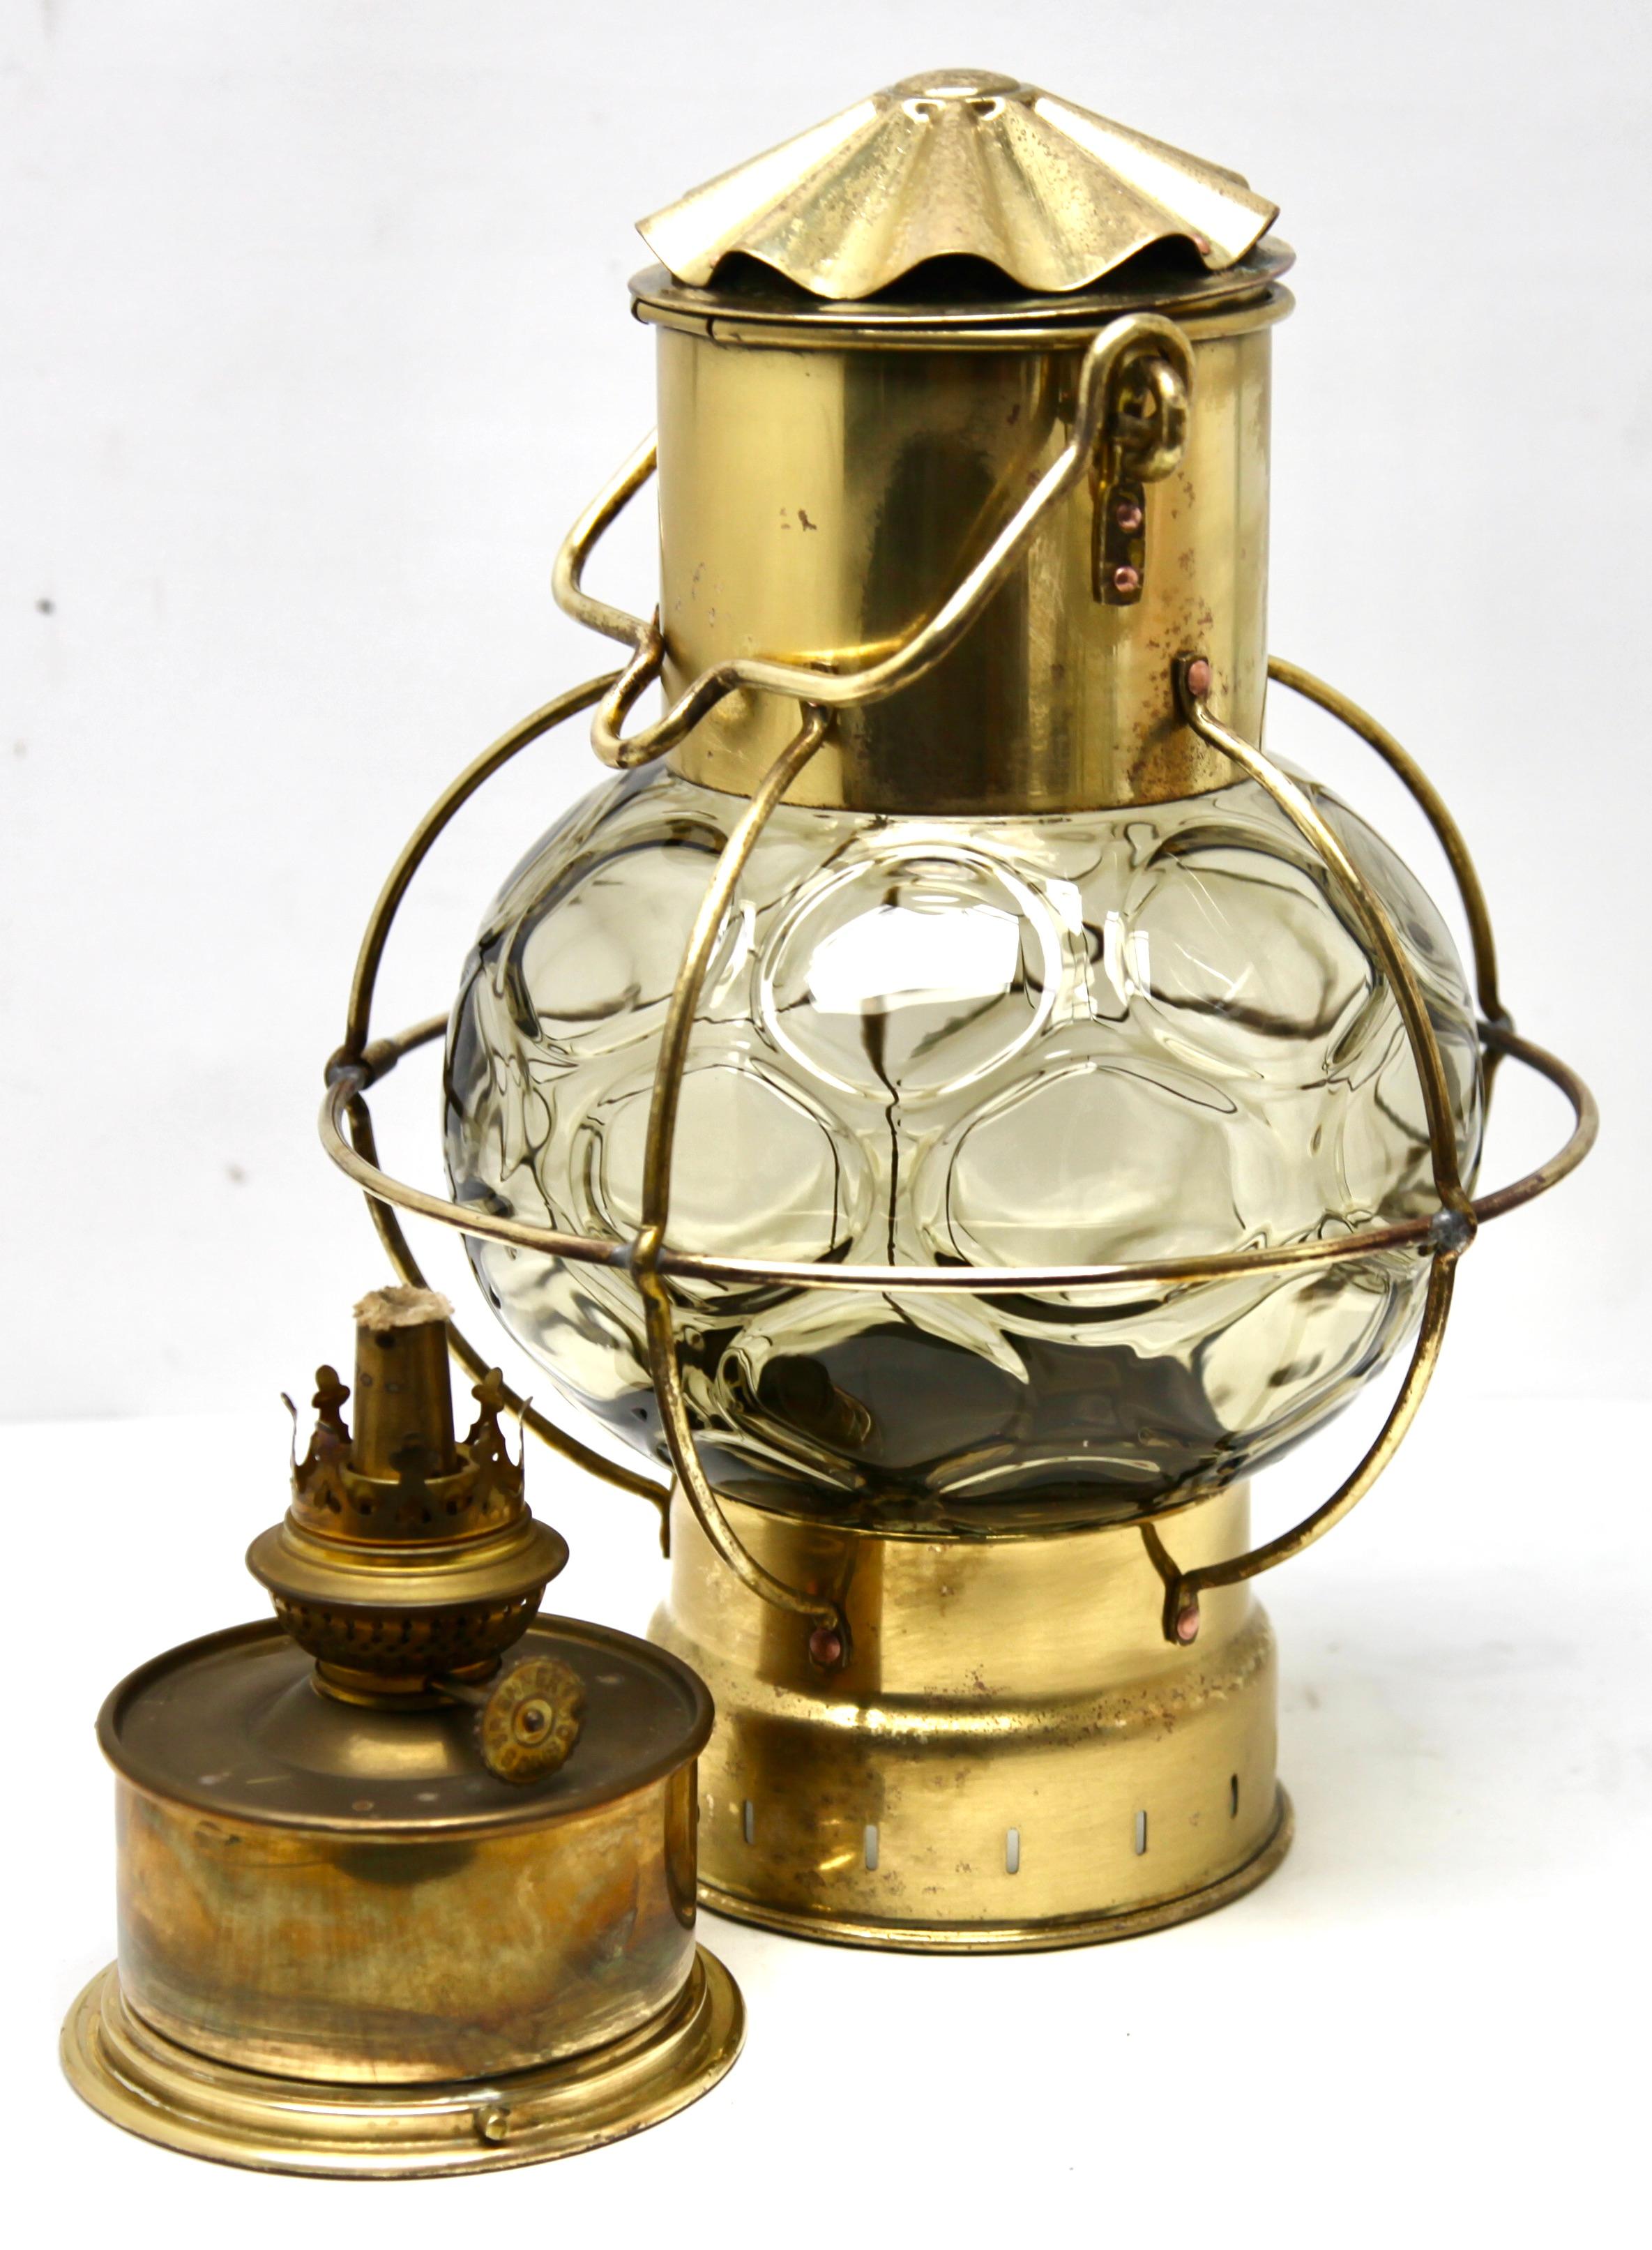 Brass Antique Kosmos Brenner Oil Ships Lamp Converted to Electric, 1900s